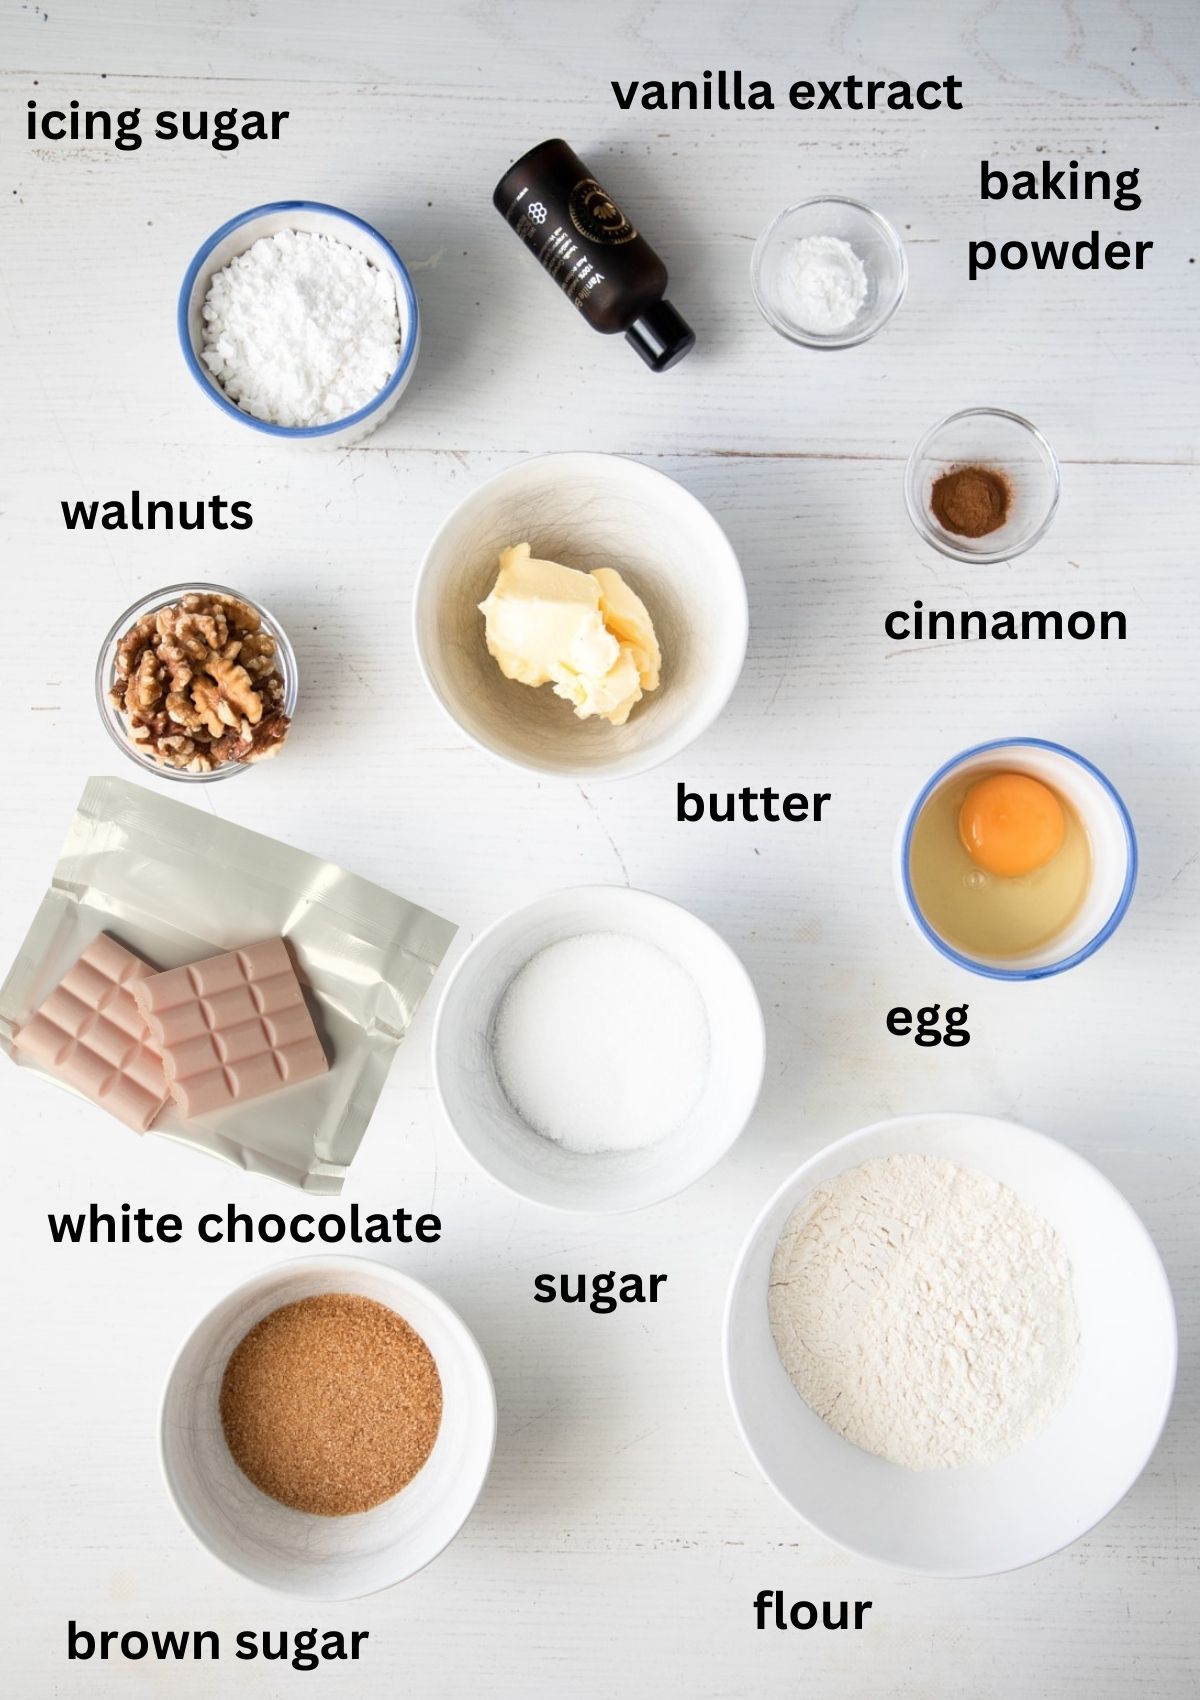 labeled ingredients for cookies with walnuts and white chocolate.